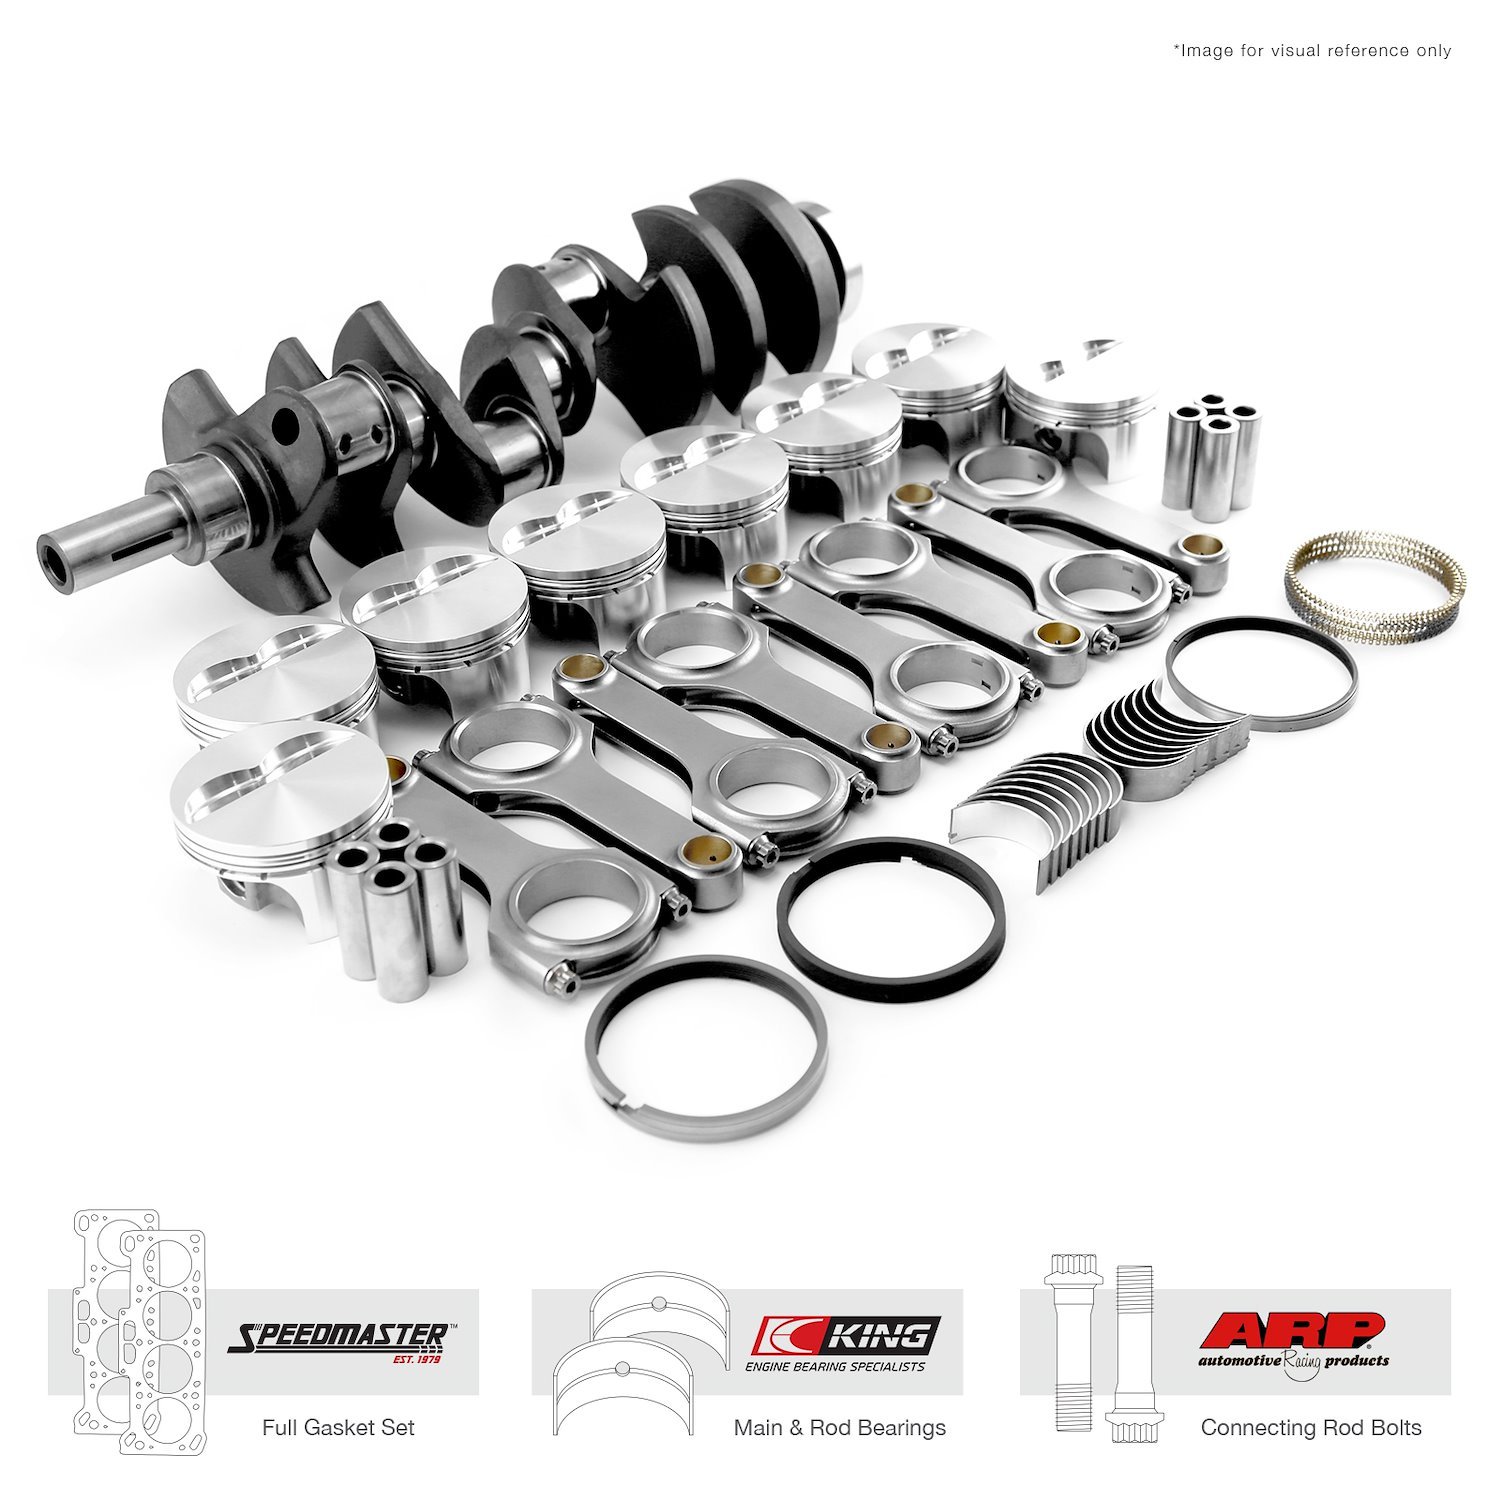 1-290-007-04 Ford SB 289 302 Windsor 3.400" 347 ci Rotating Assembly Kit - Outlaw Series 040